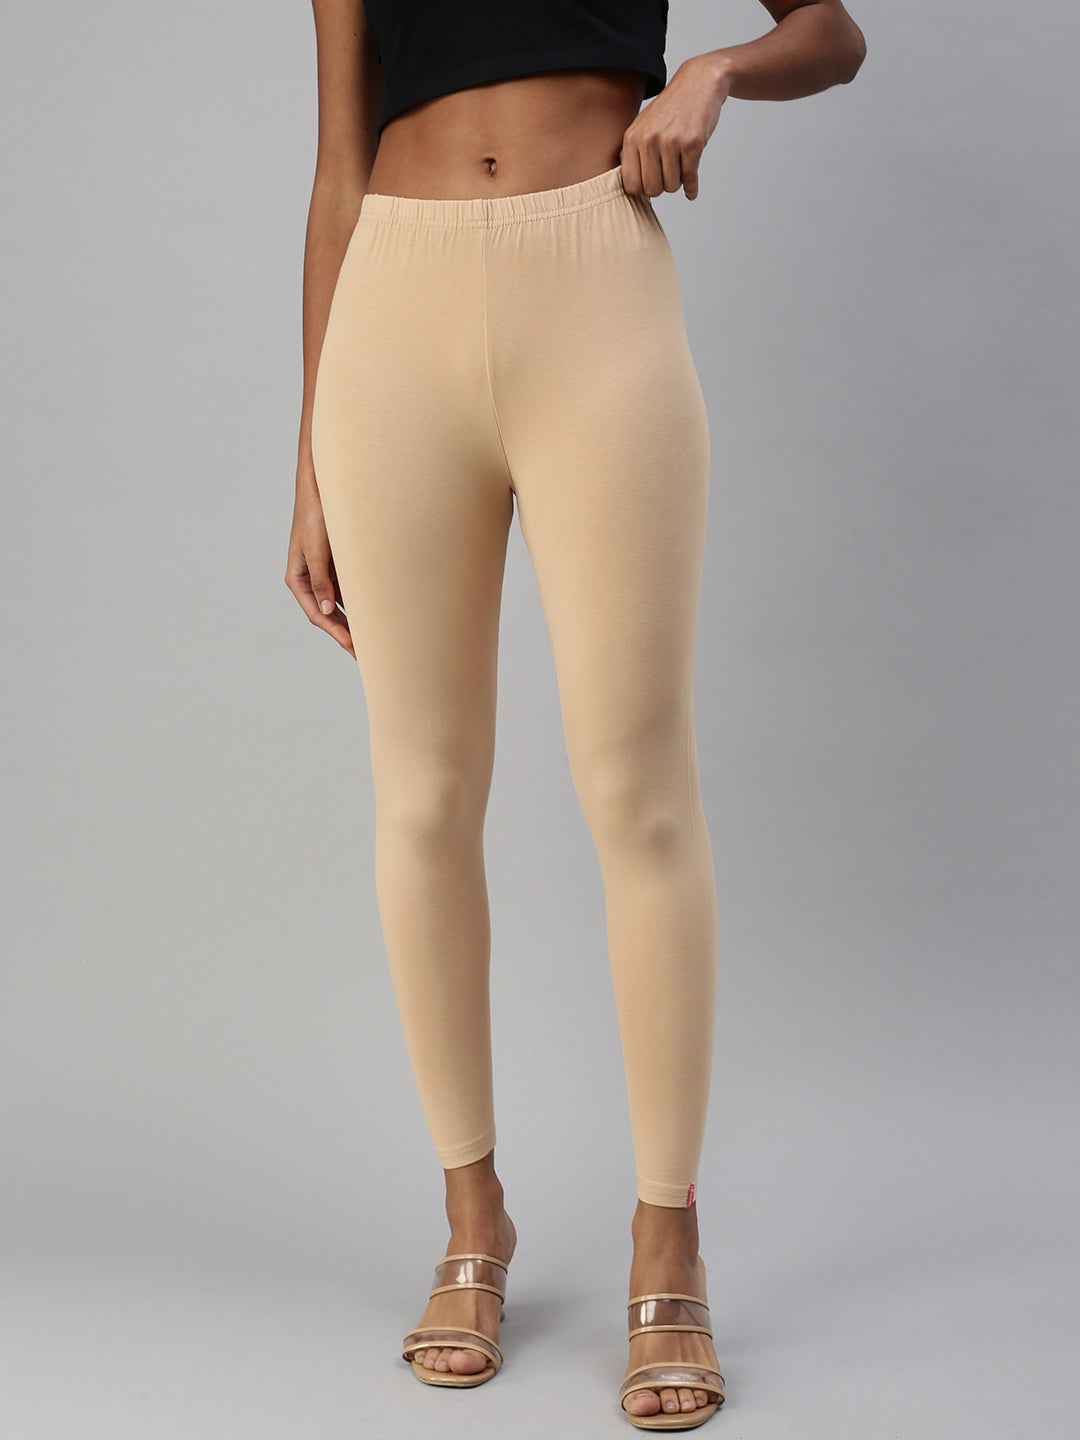 Women Ankle Length Leggings Colors Beige Free Size Free Shipping 